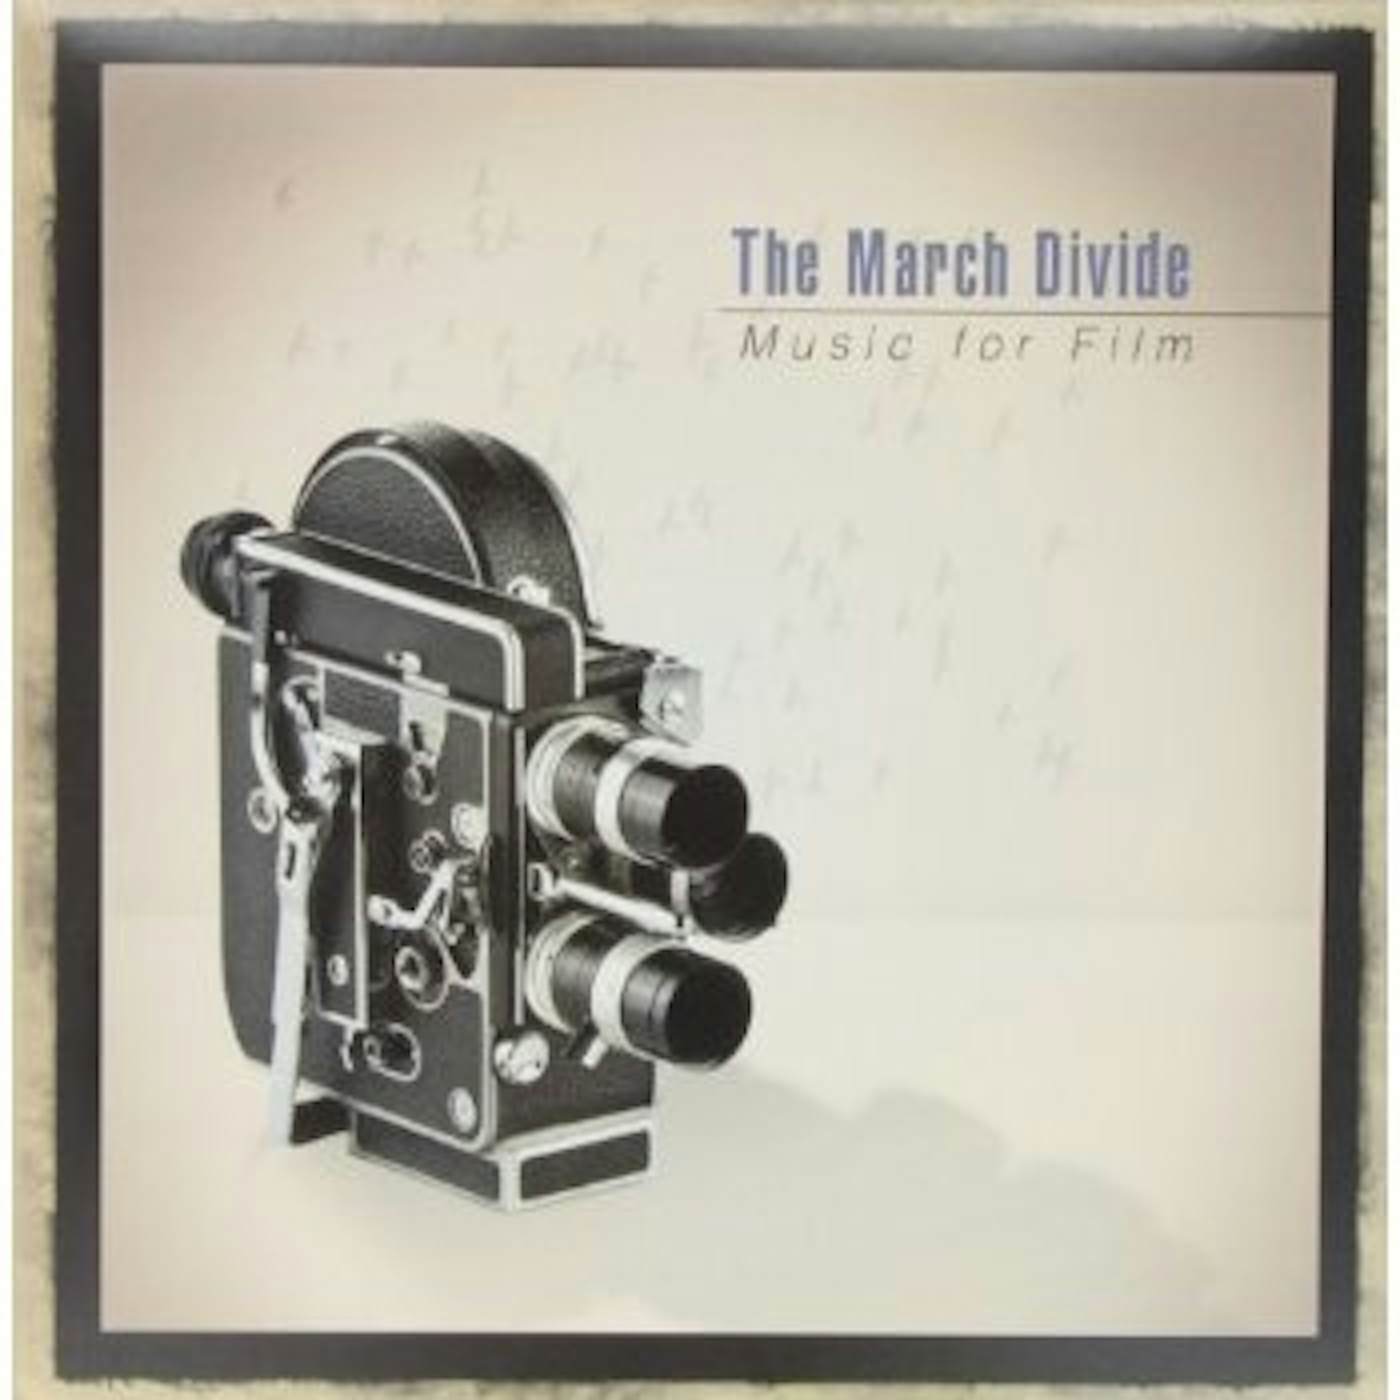 The March Divide Music for Film Vinyl Record